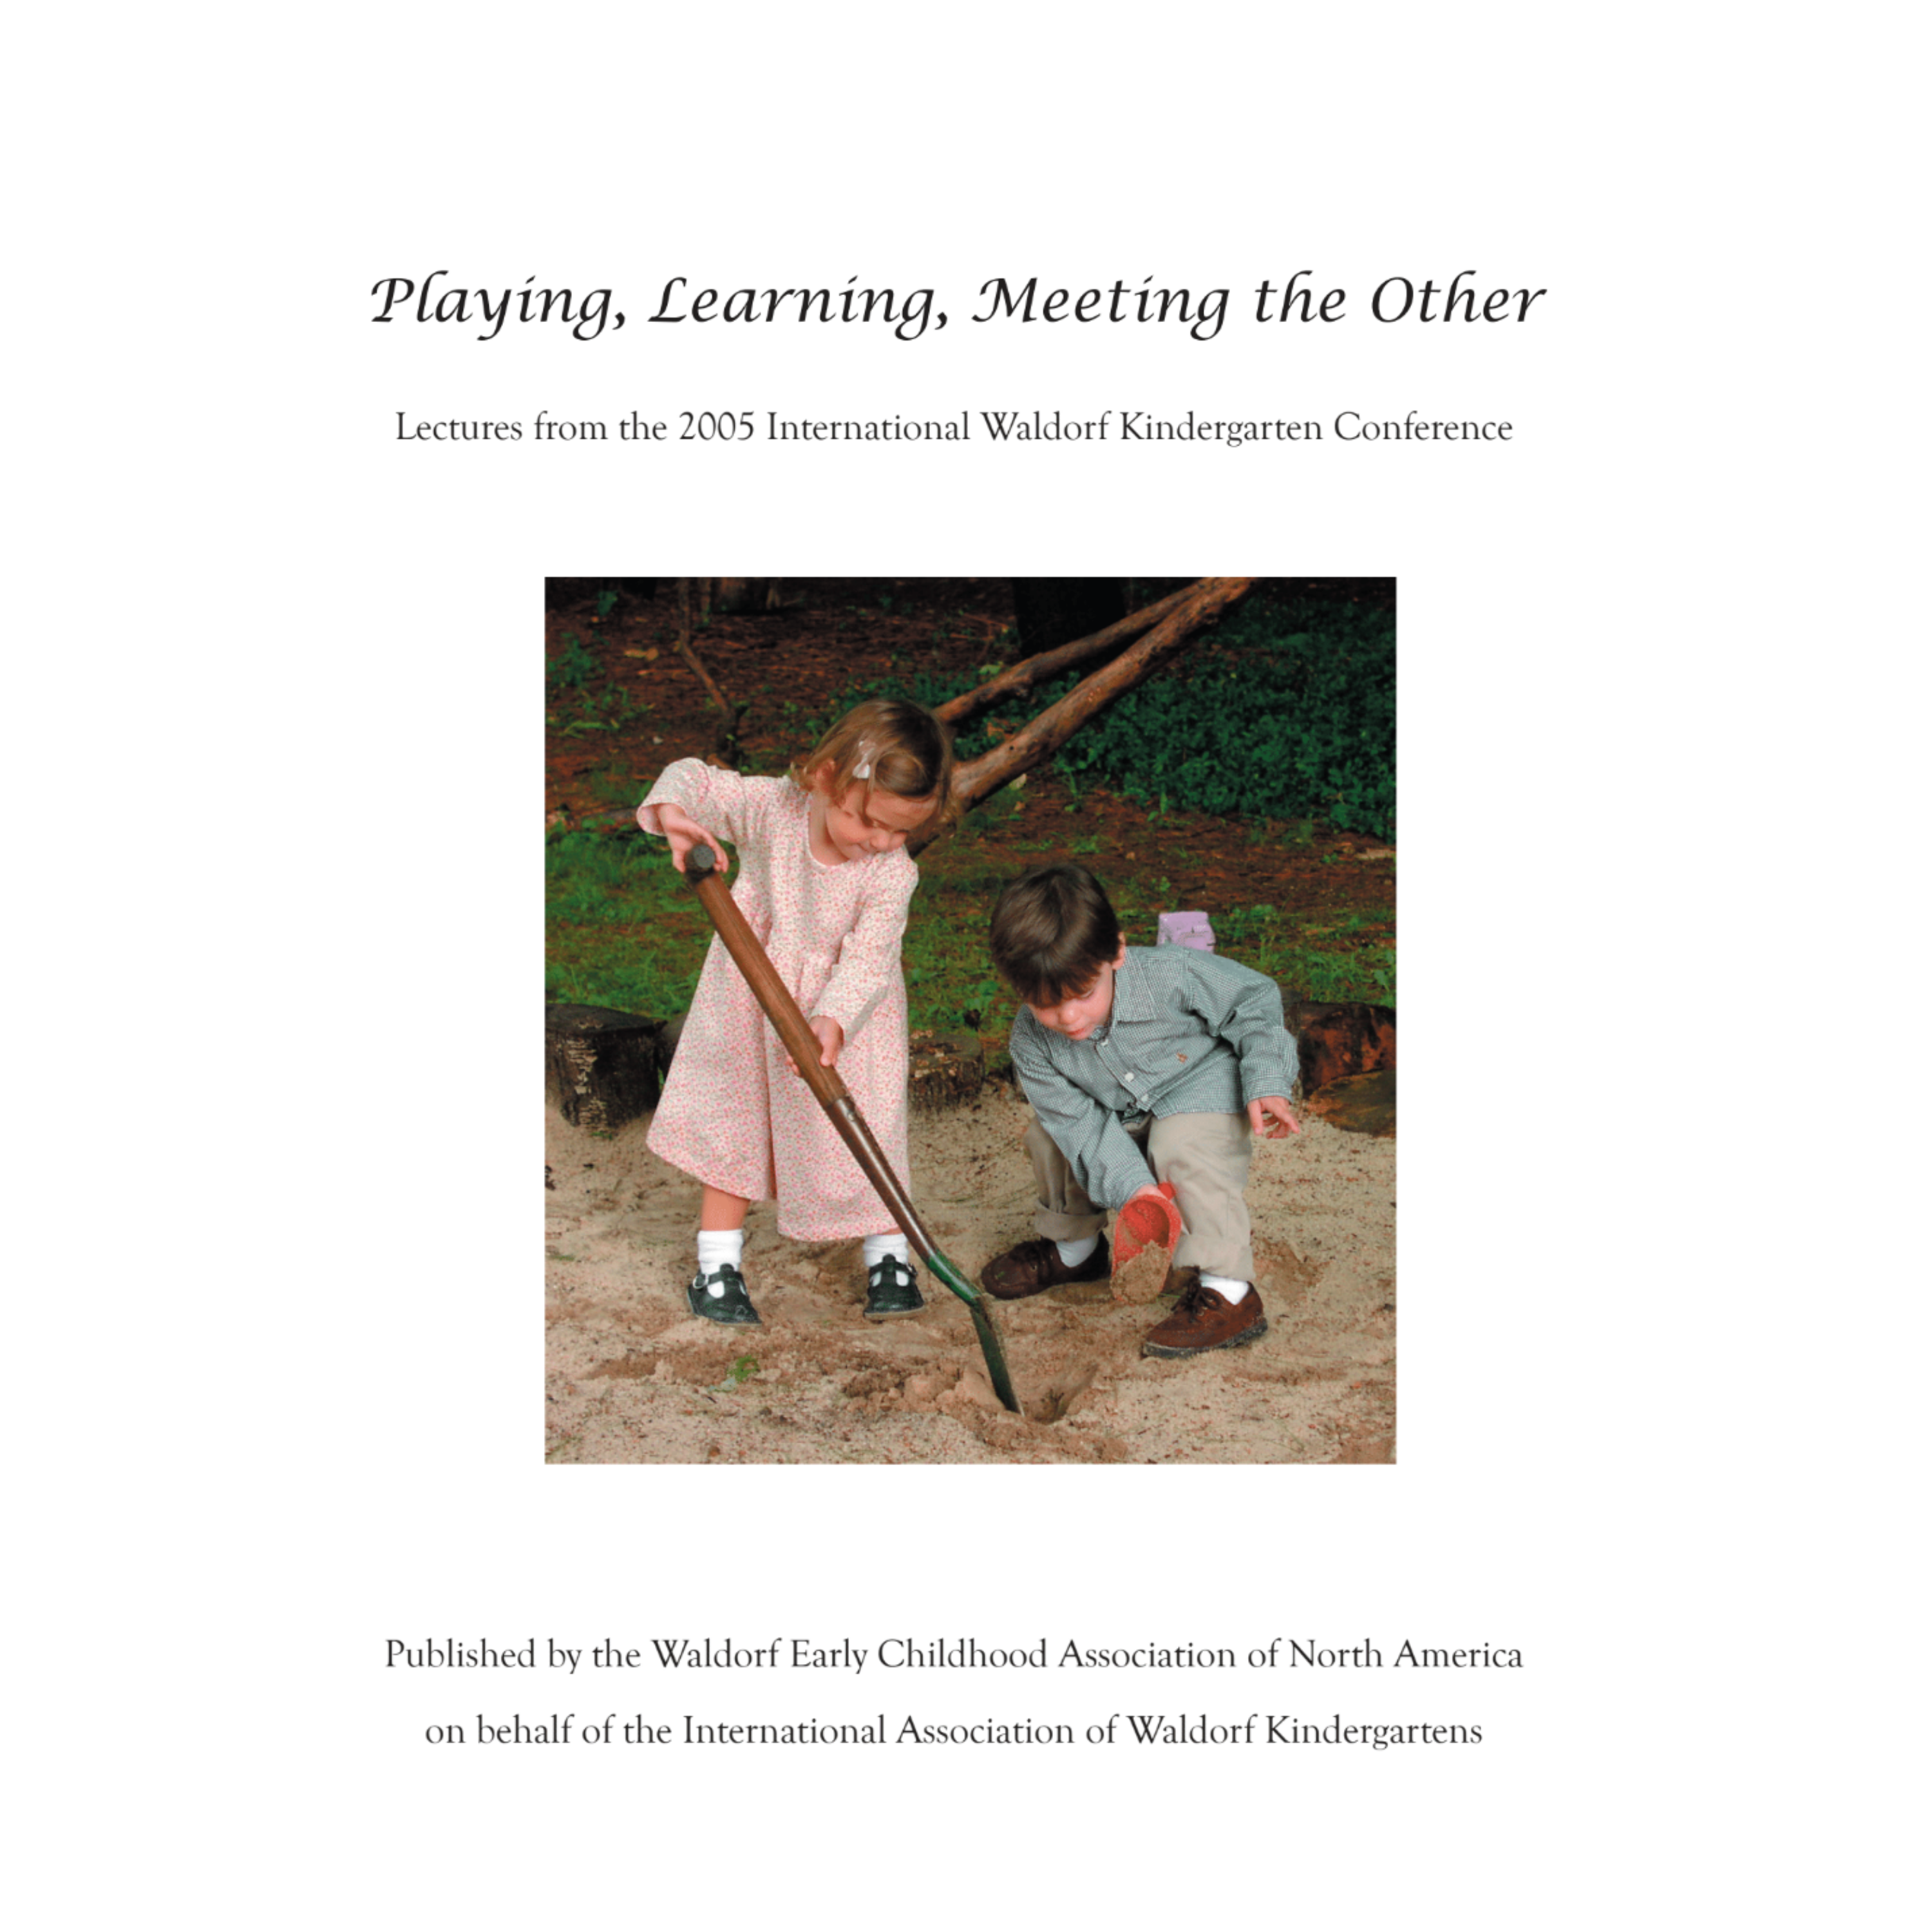 Playing, Learning, Meeting the Other: Lectures from the 2005 International Waldorf Kindergarten Conference